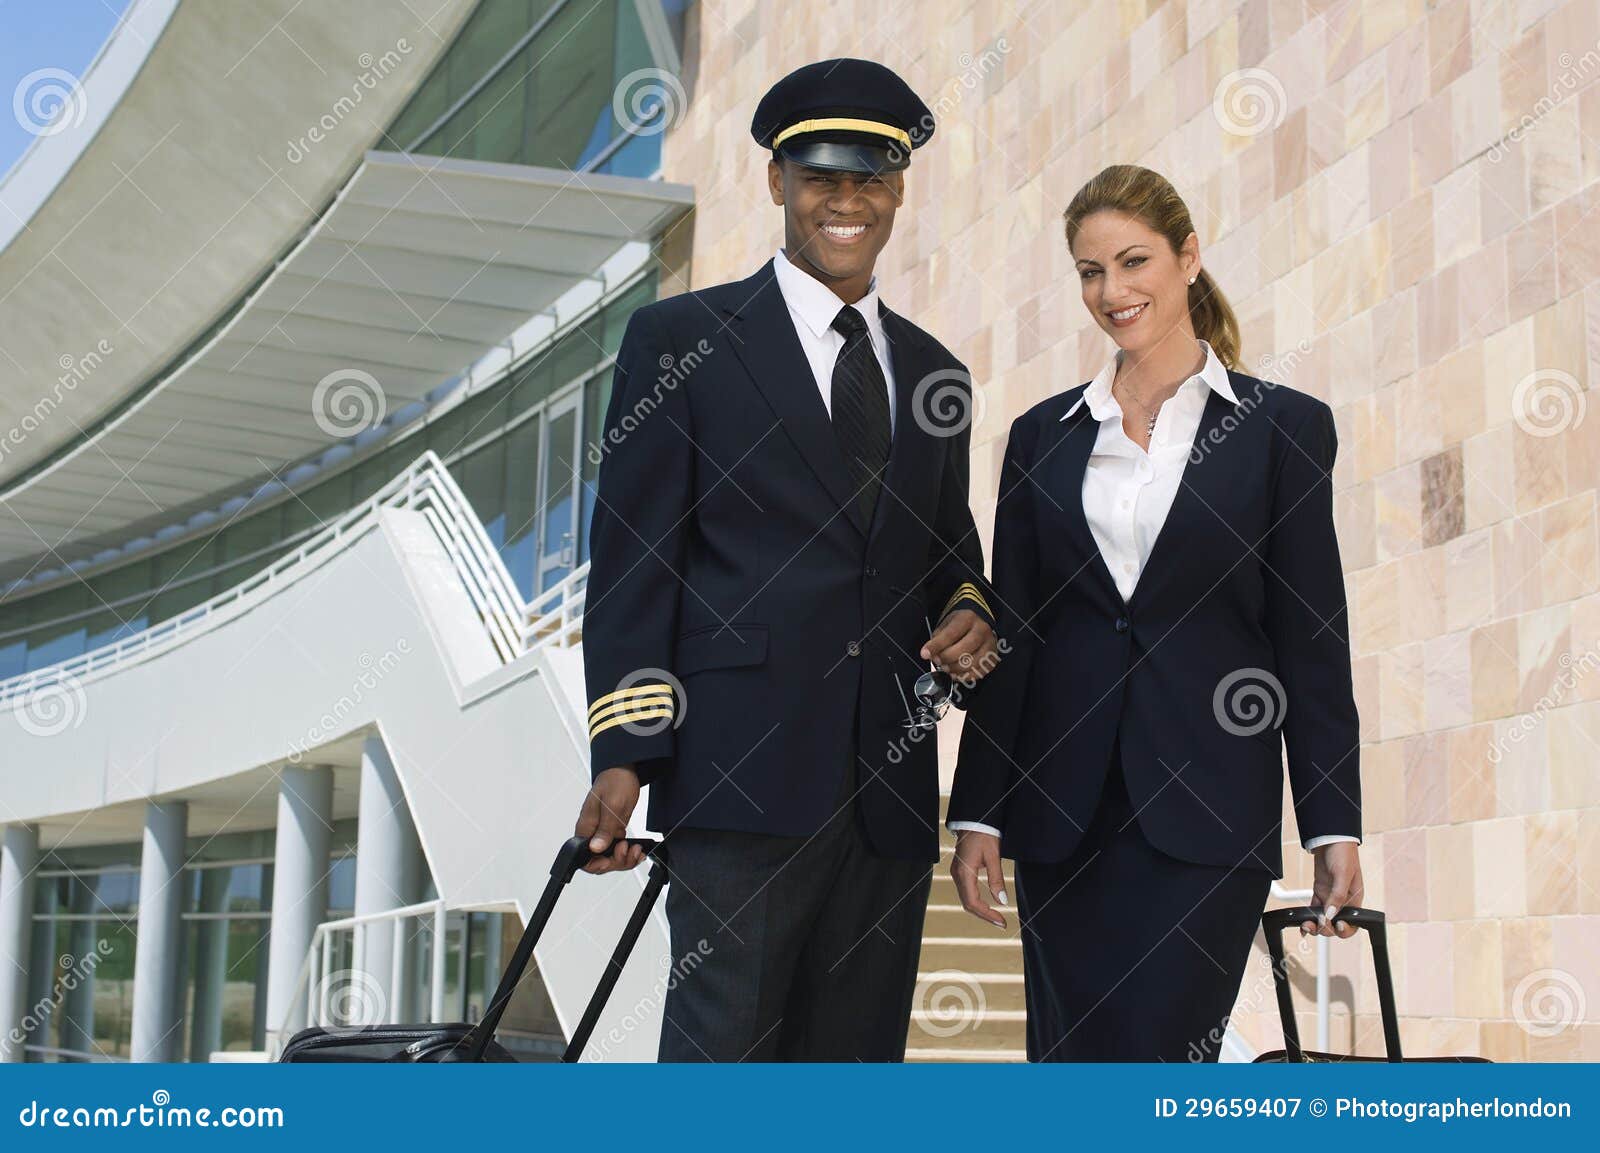 pilot and flight attendant outside building